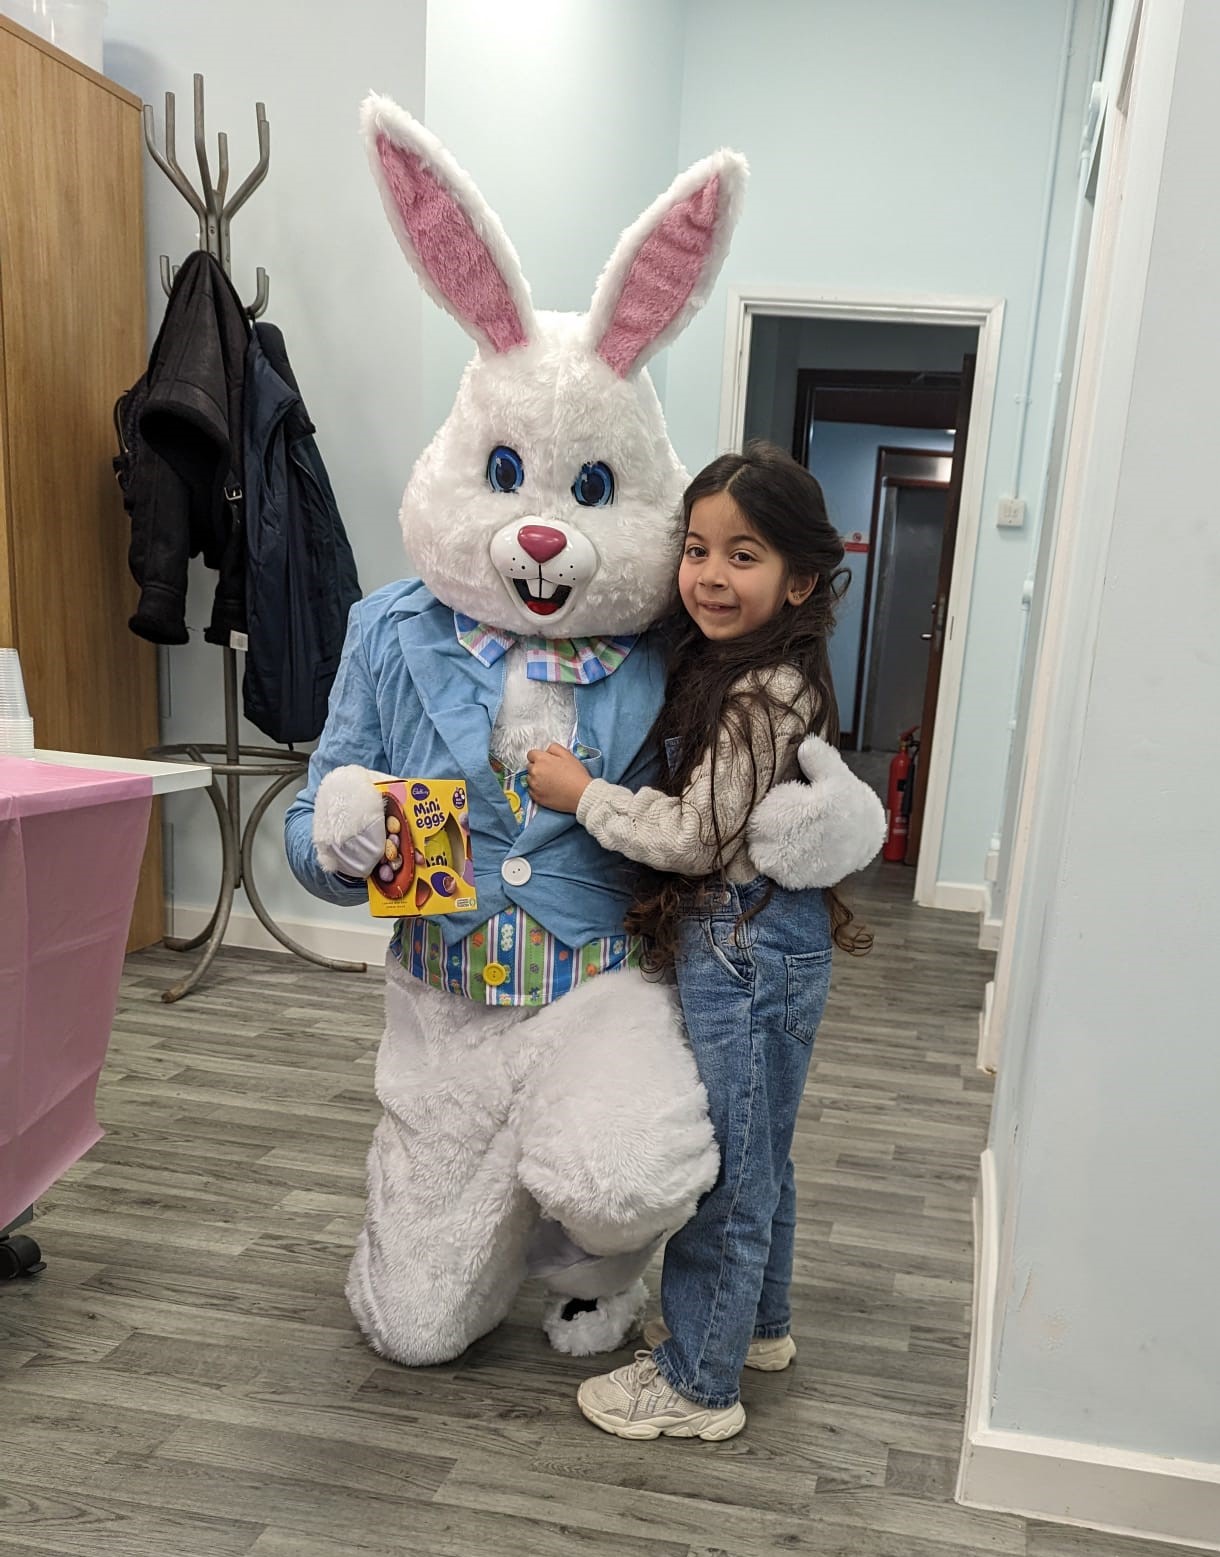 The Easter Bunny with one of the children at the event